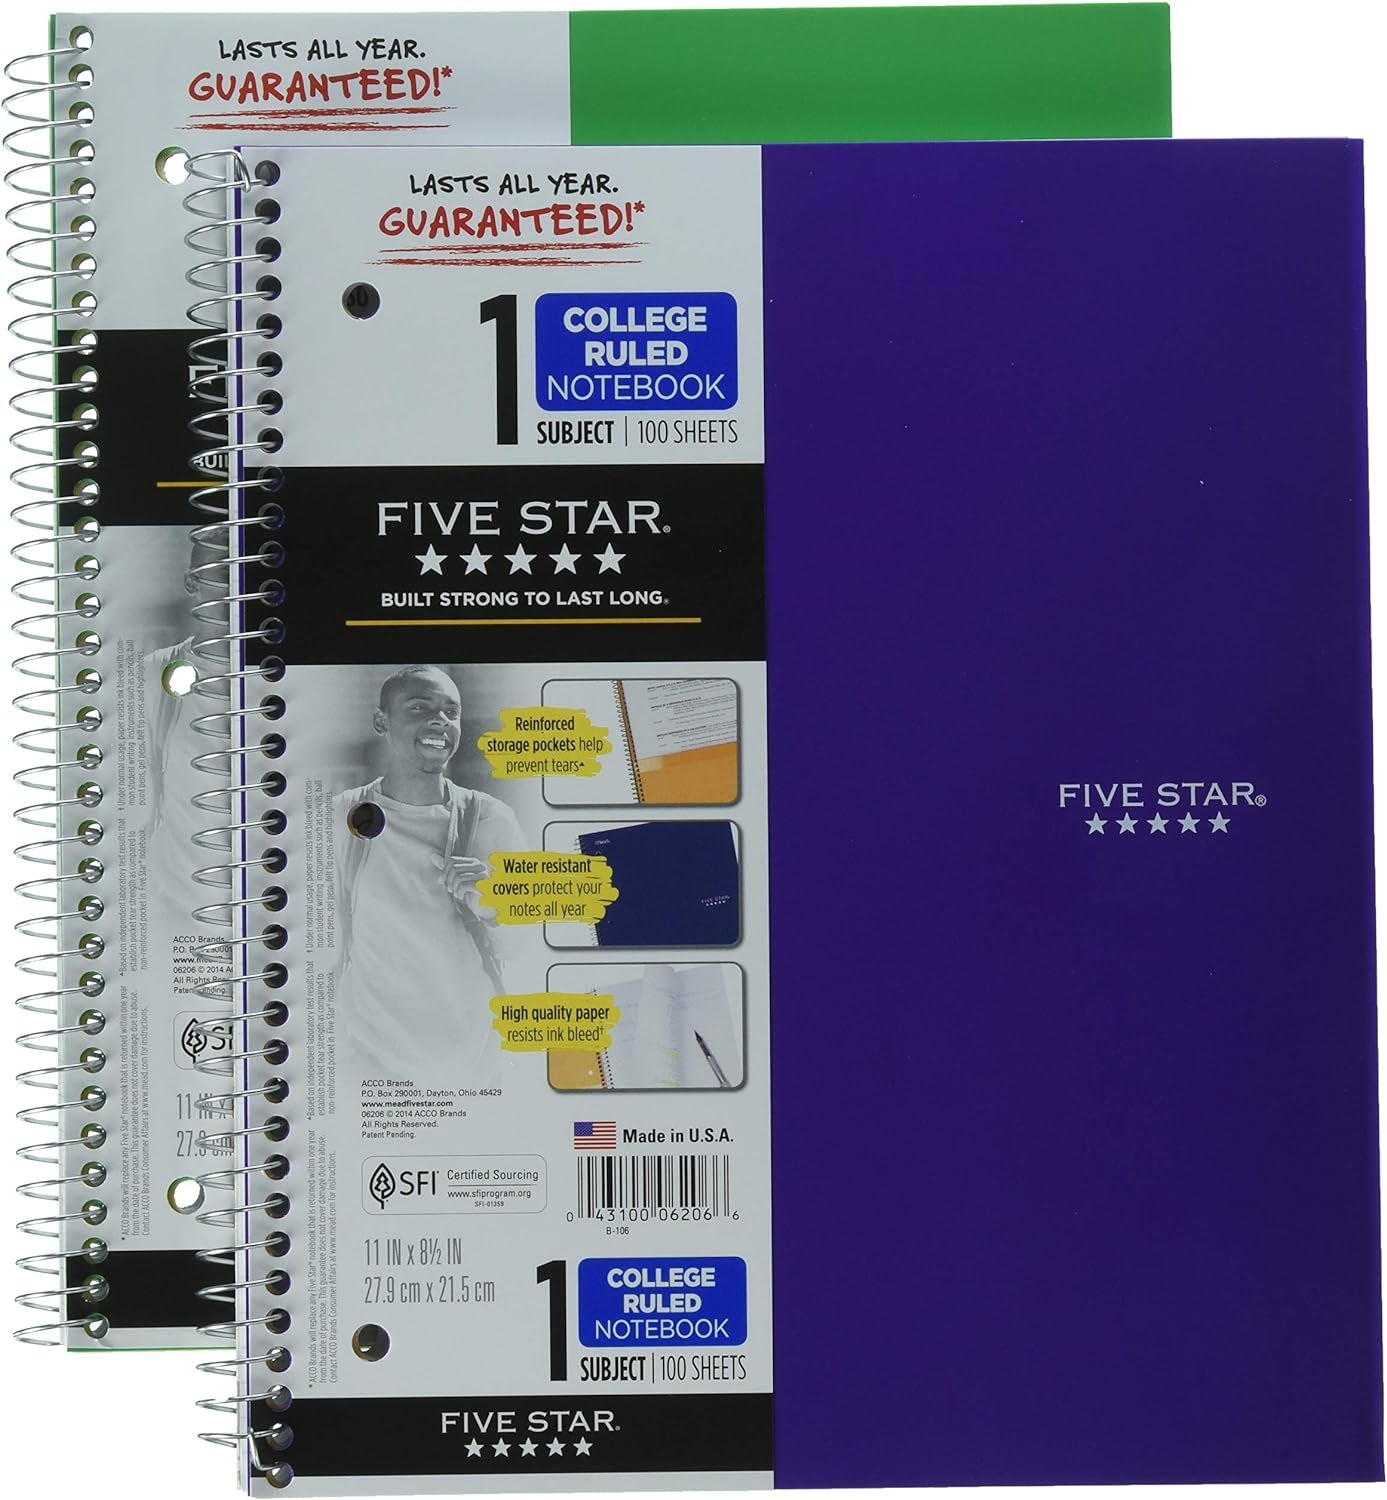 Spiral Notebooks + Study App, 2 Pack, 1 Subject, College Ruled Paper, 200 Sheets, 11" X 8-1/2", White, Amethyst Purple (820186-ECM)